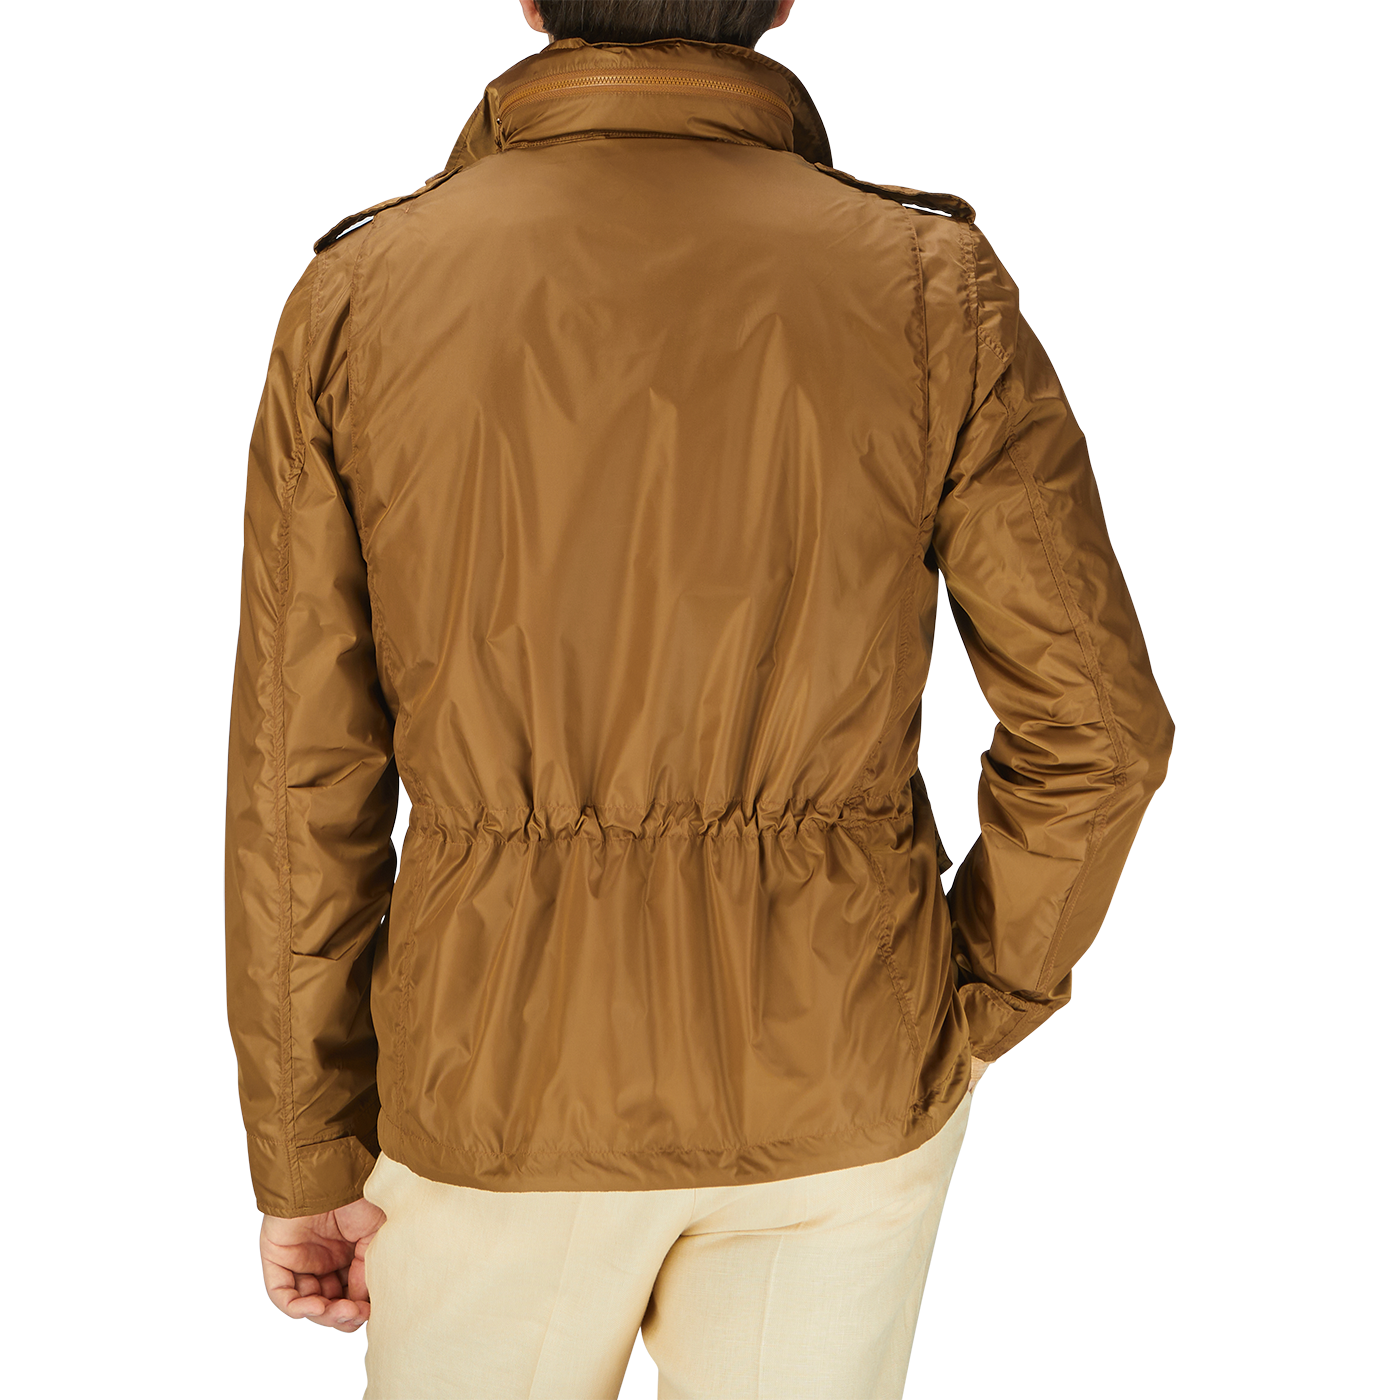 The man is wearing an Amber Brown Recycled Nylon Field Jacket made by Aspesi.